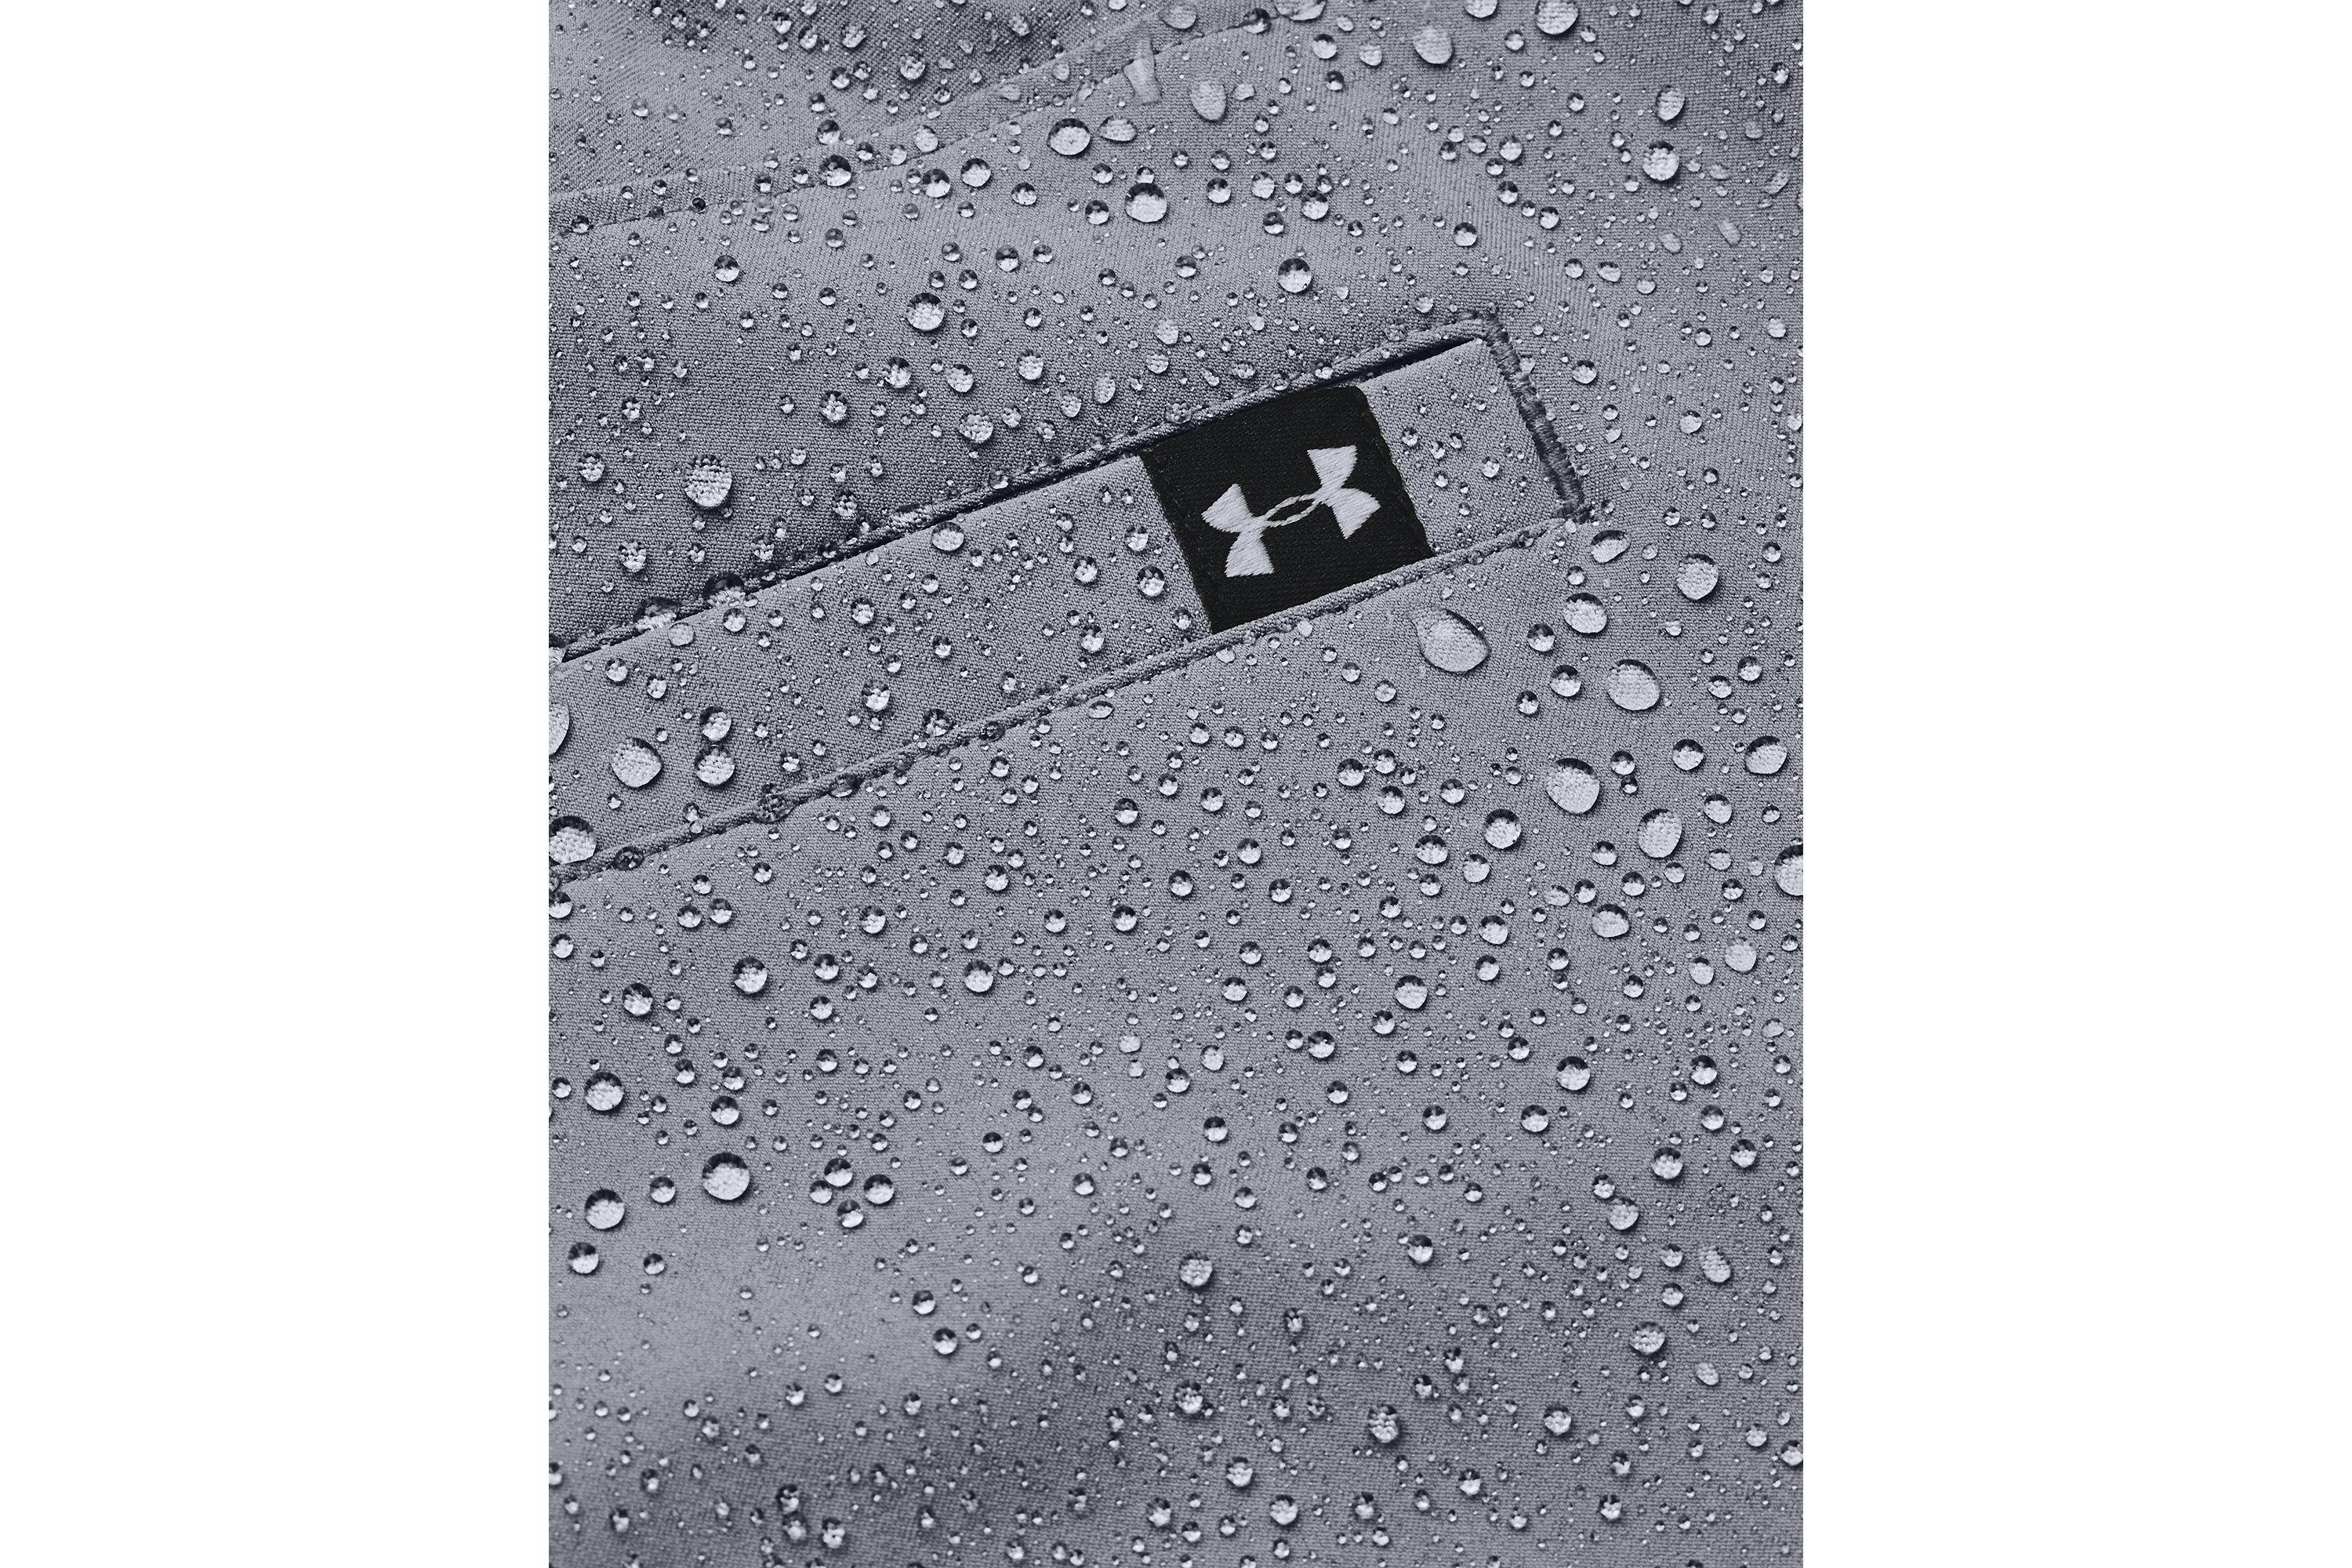 Under Armour Men's Drive Taper Shorts